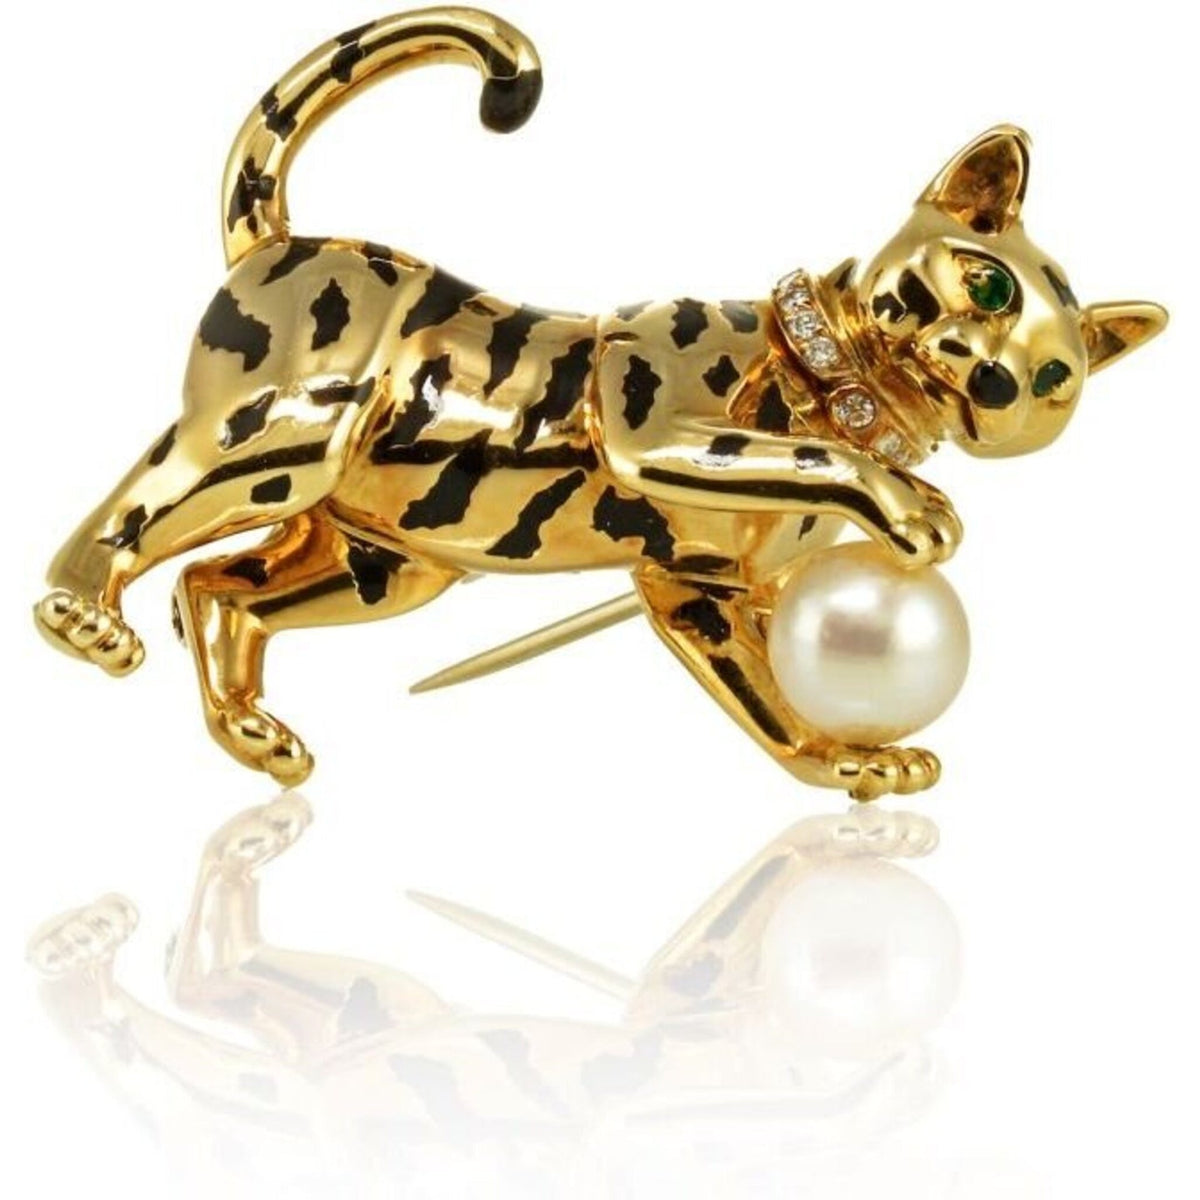 Elegant Cat Brooch by Cartier showcasing the popularity of cat jewelry